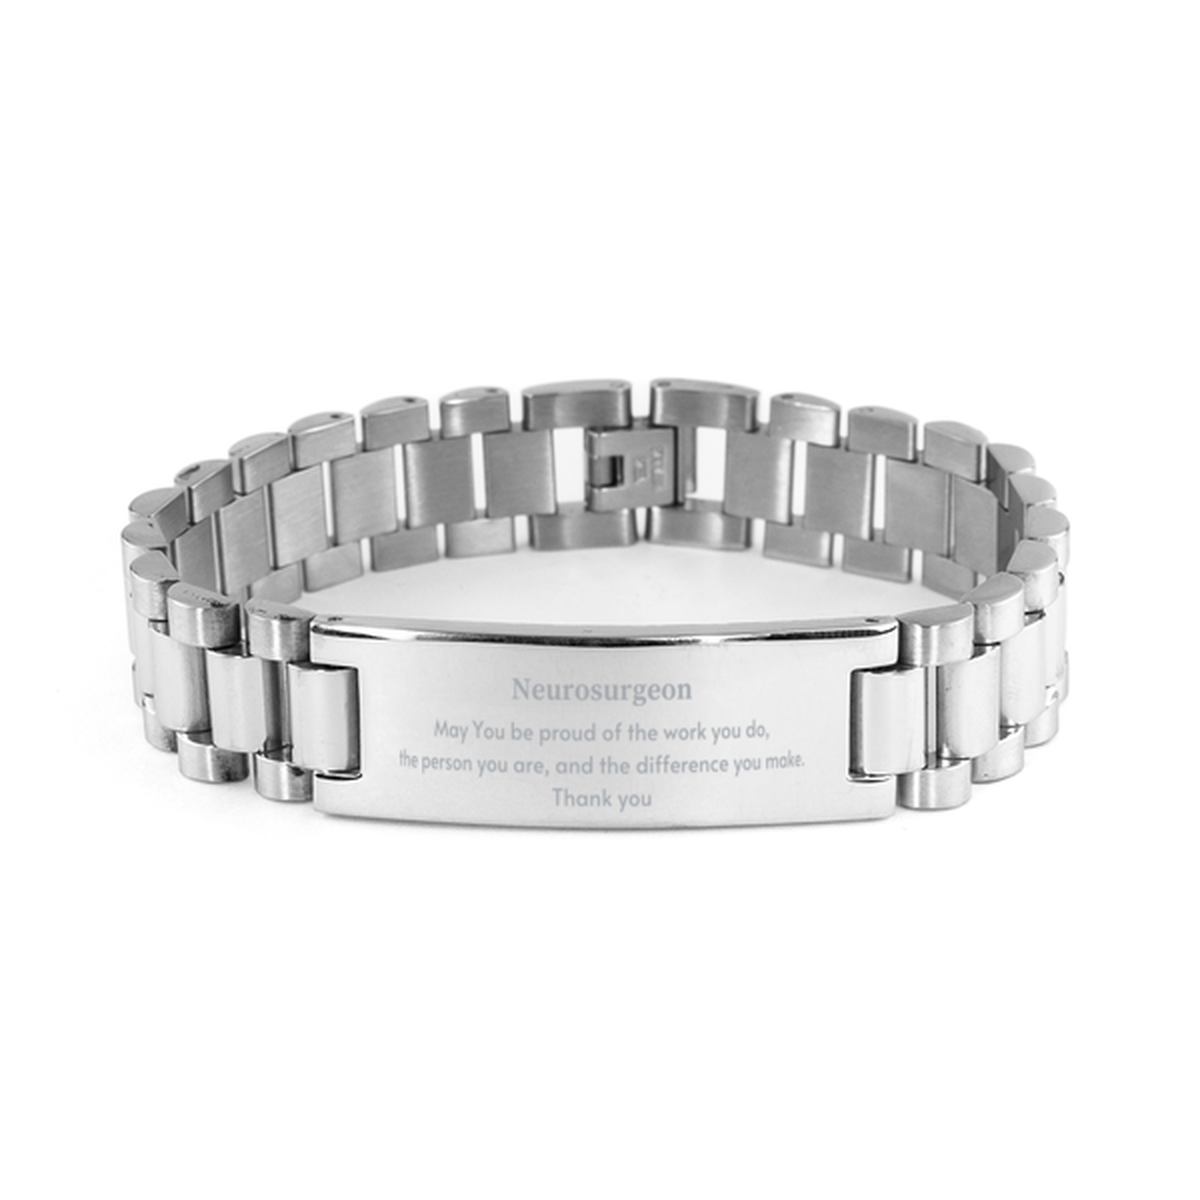 Heartwarming Ladder Stainless Steel Bracelet Retirement Coworkers Gifts for Neurosurgeon, Neurosurgeon May You be proud of the work you do, the person you are Gifts for Boss Men Women Friends